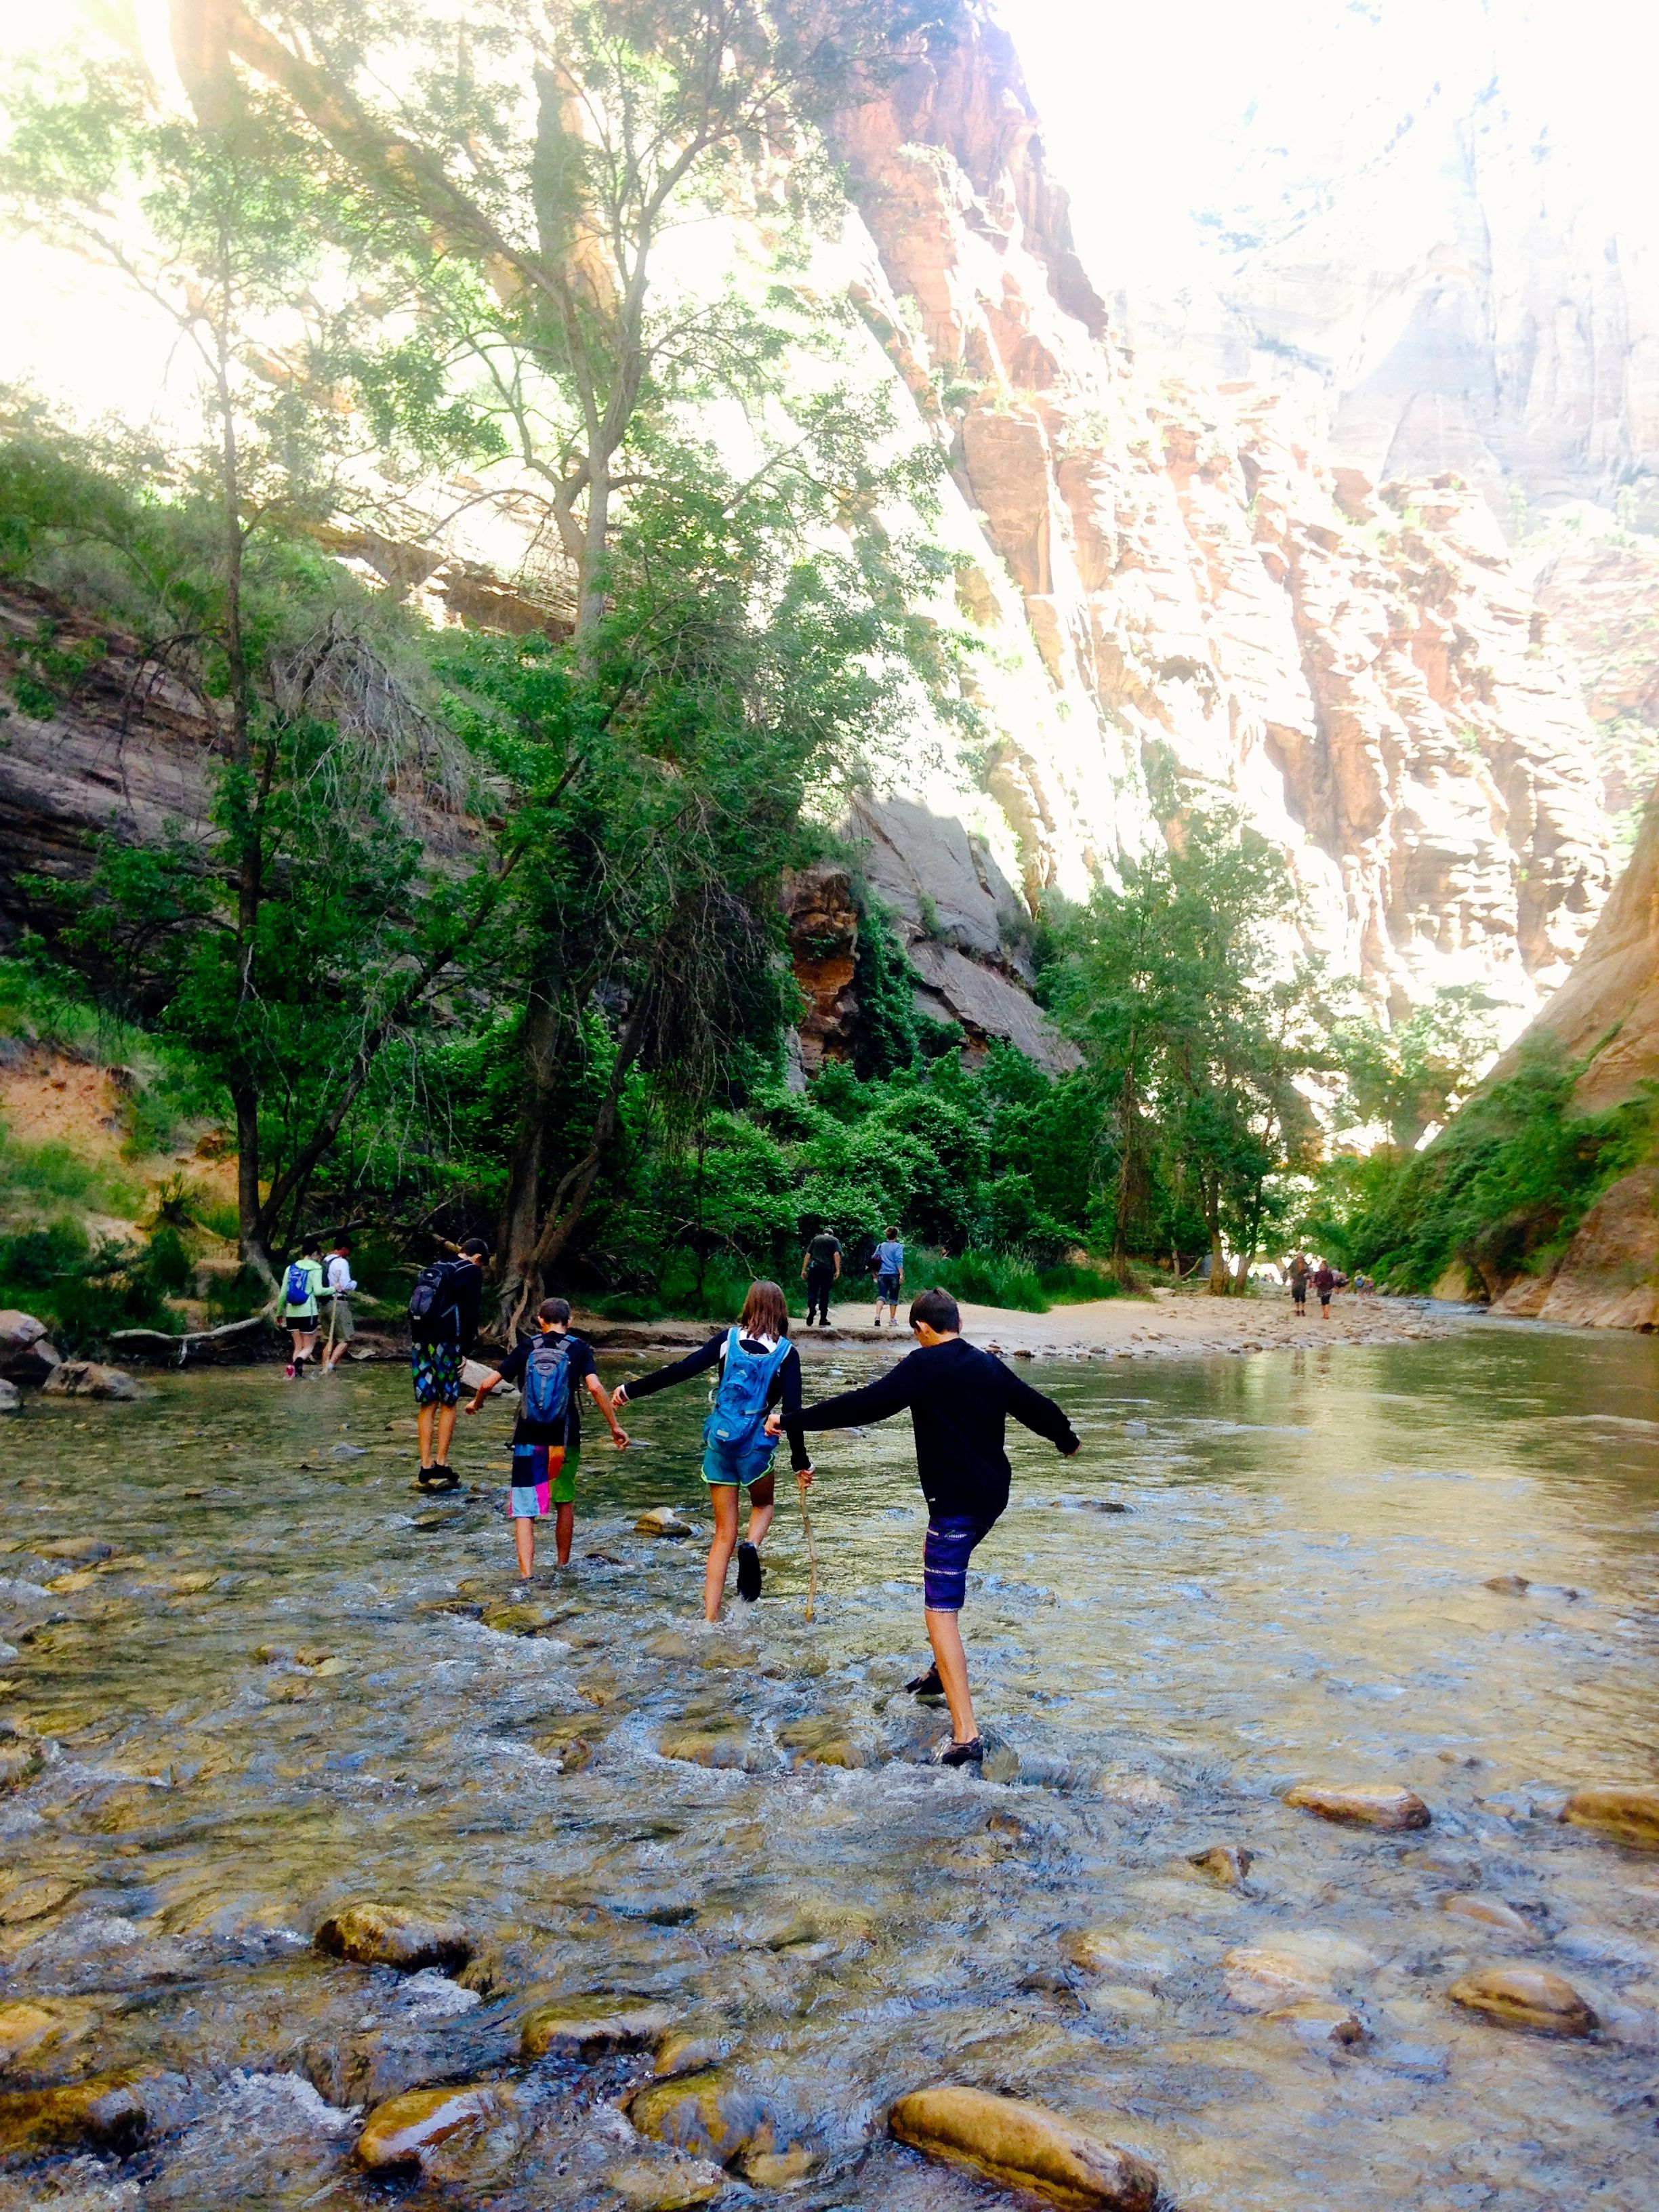 The Narrows Family Hike in Zion National Park